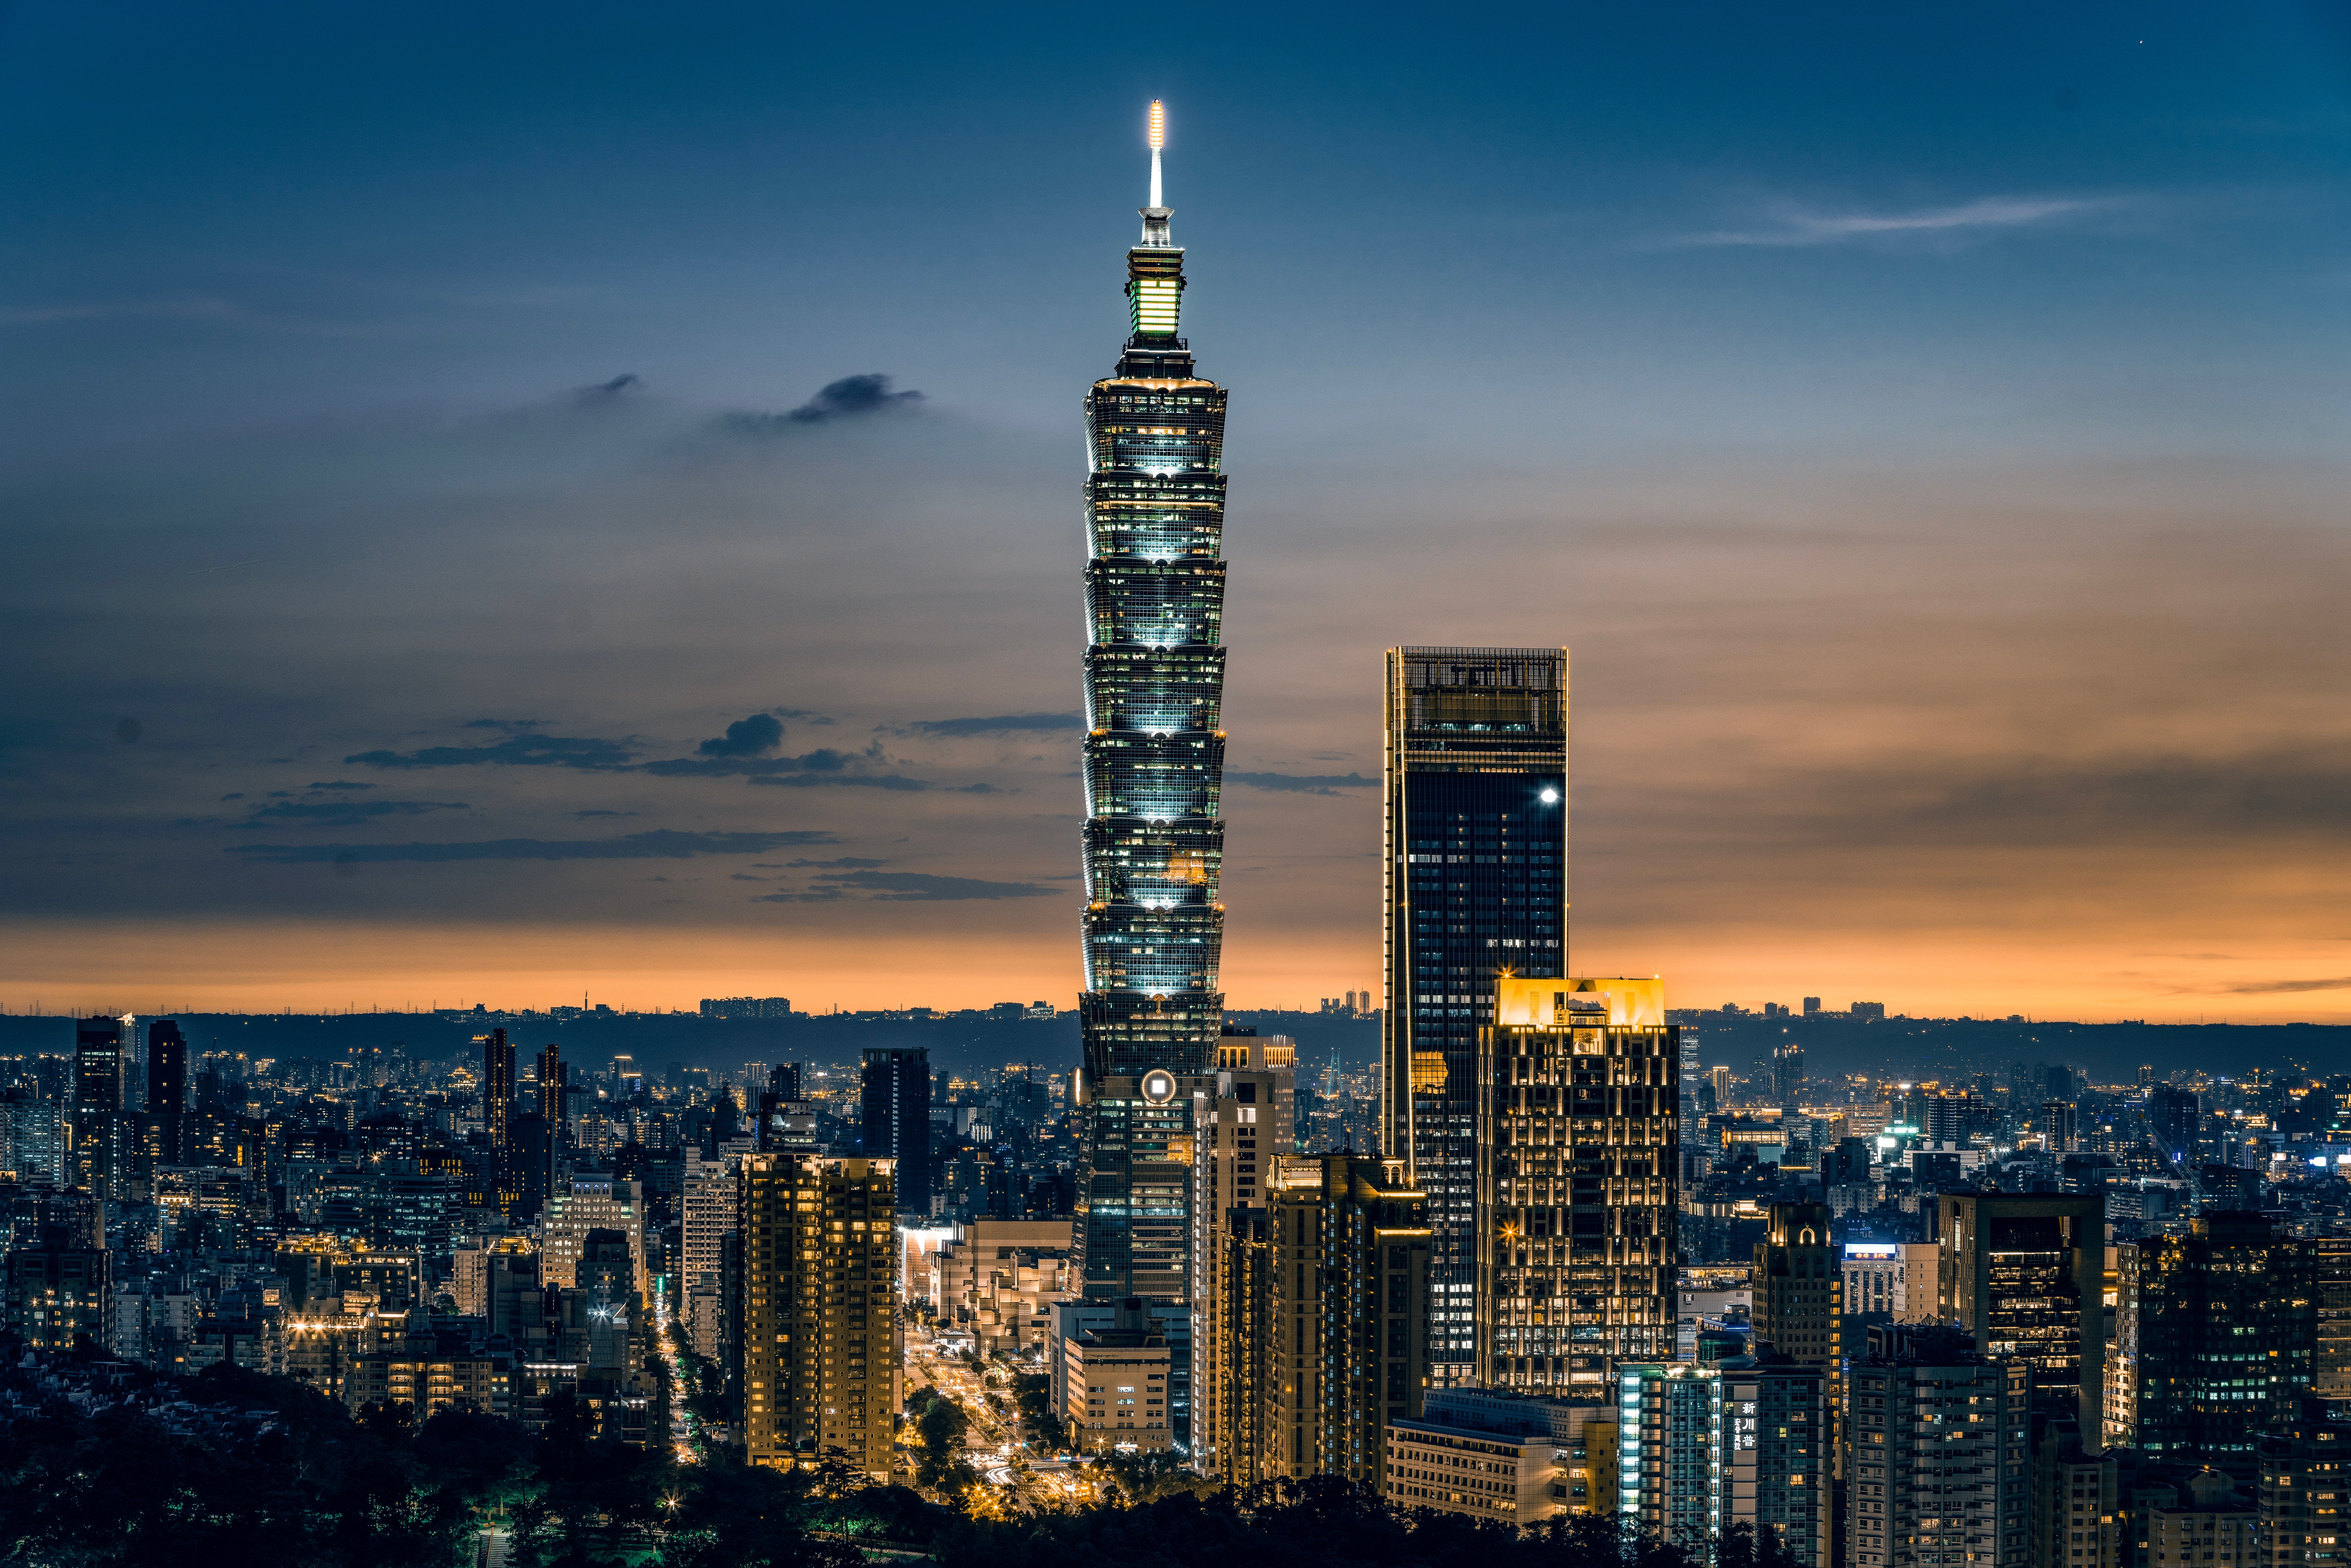 Taiwan photos download the best free taiwan stock photos hd images